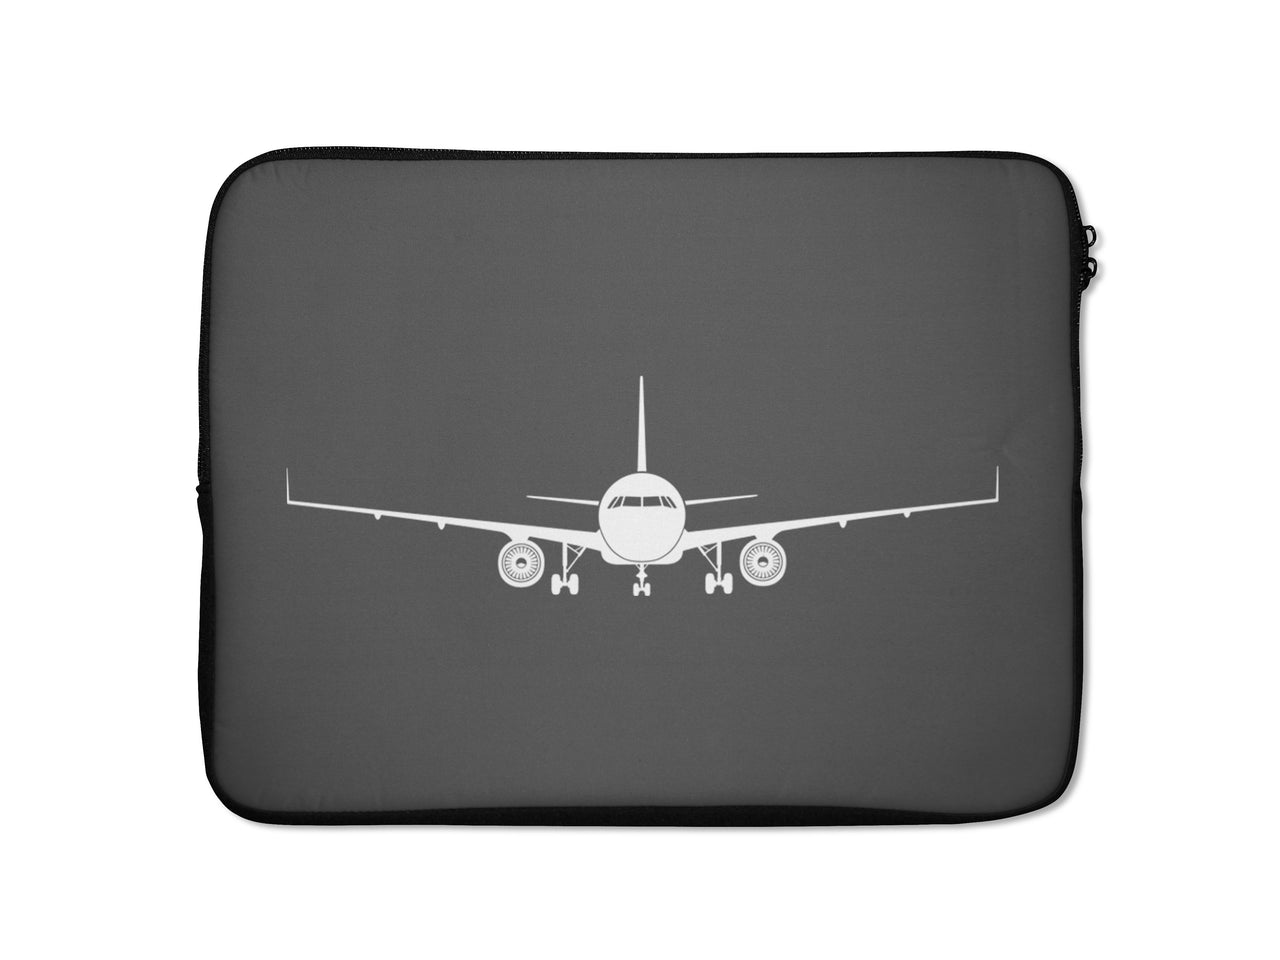 Airbus A320 Silhouette Designed Laptop & Tablet Cases